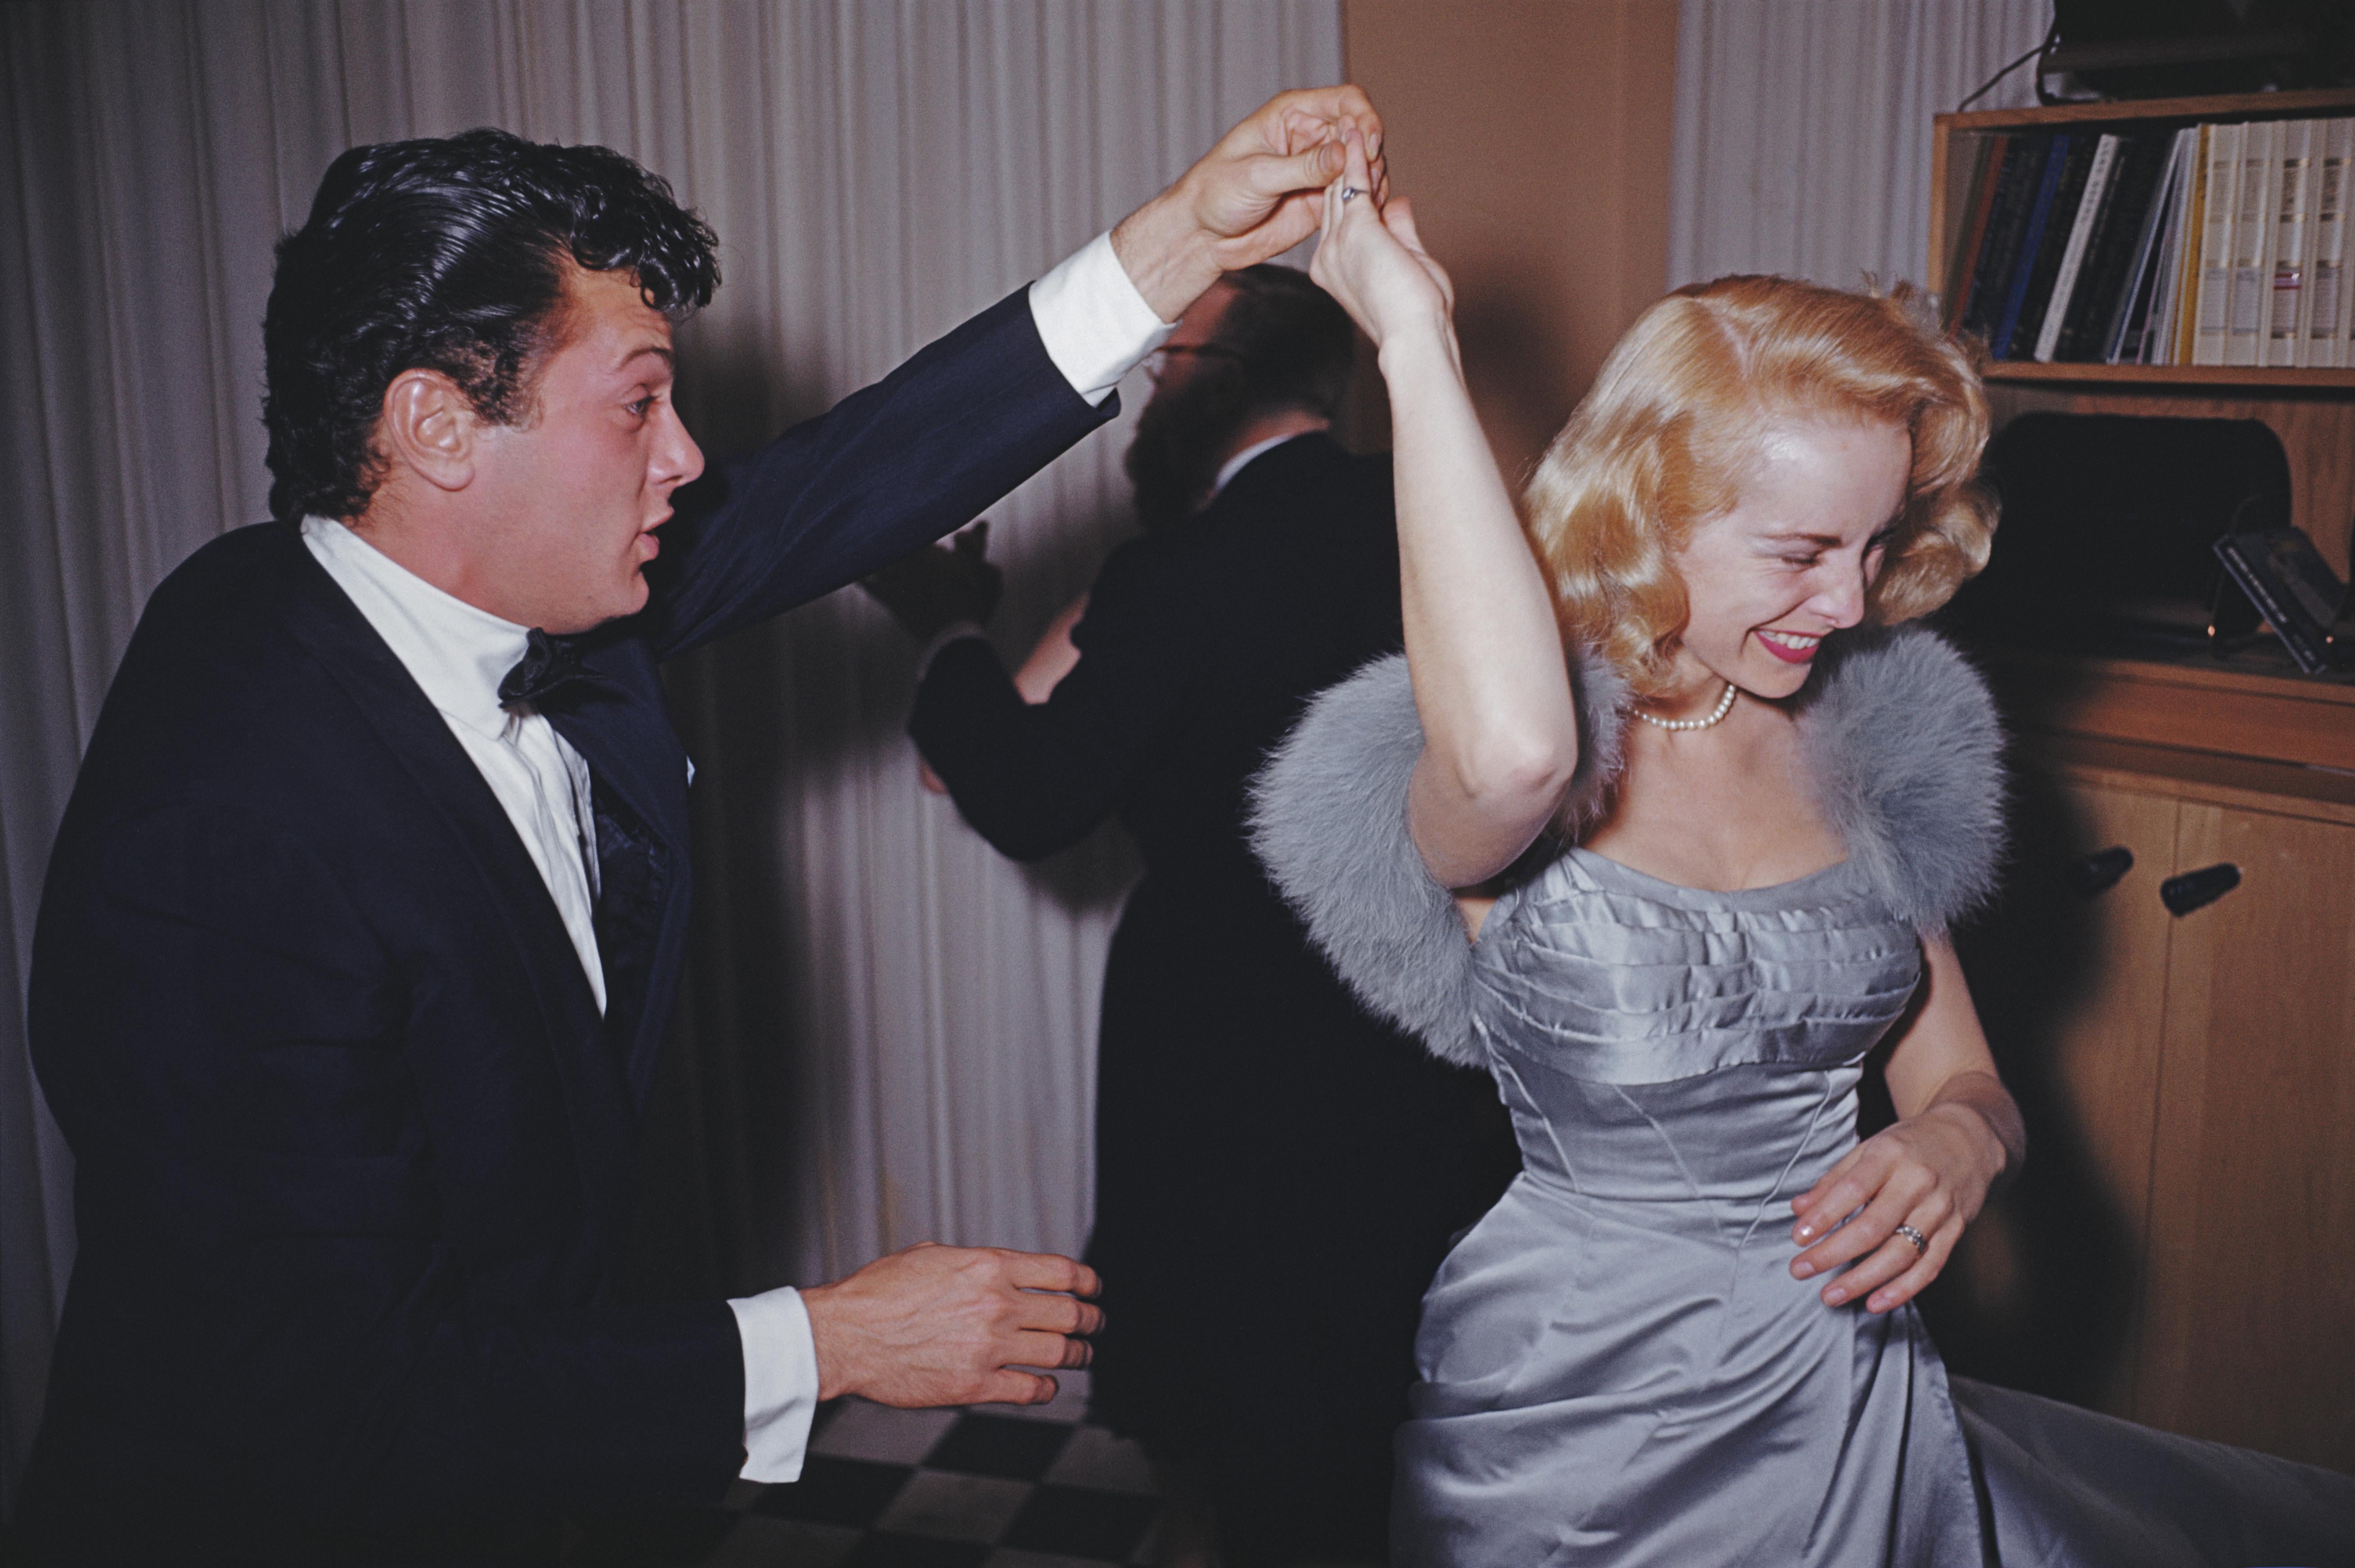 'Let's Twirl'  Slim Aarons Limited Estate Edition Print 

Film stars Tony Curtis (Bernard Schwarz) and his wife Janet Leigh (Jeanette Morrison) enjoying a dance at a Beverly Hills party held at James Mason's home.

Produced from the original